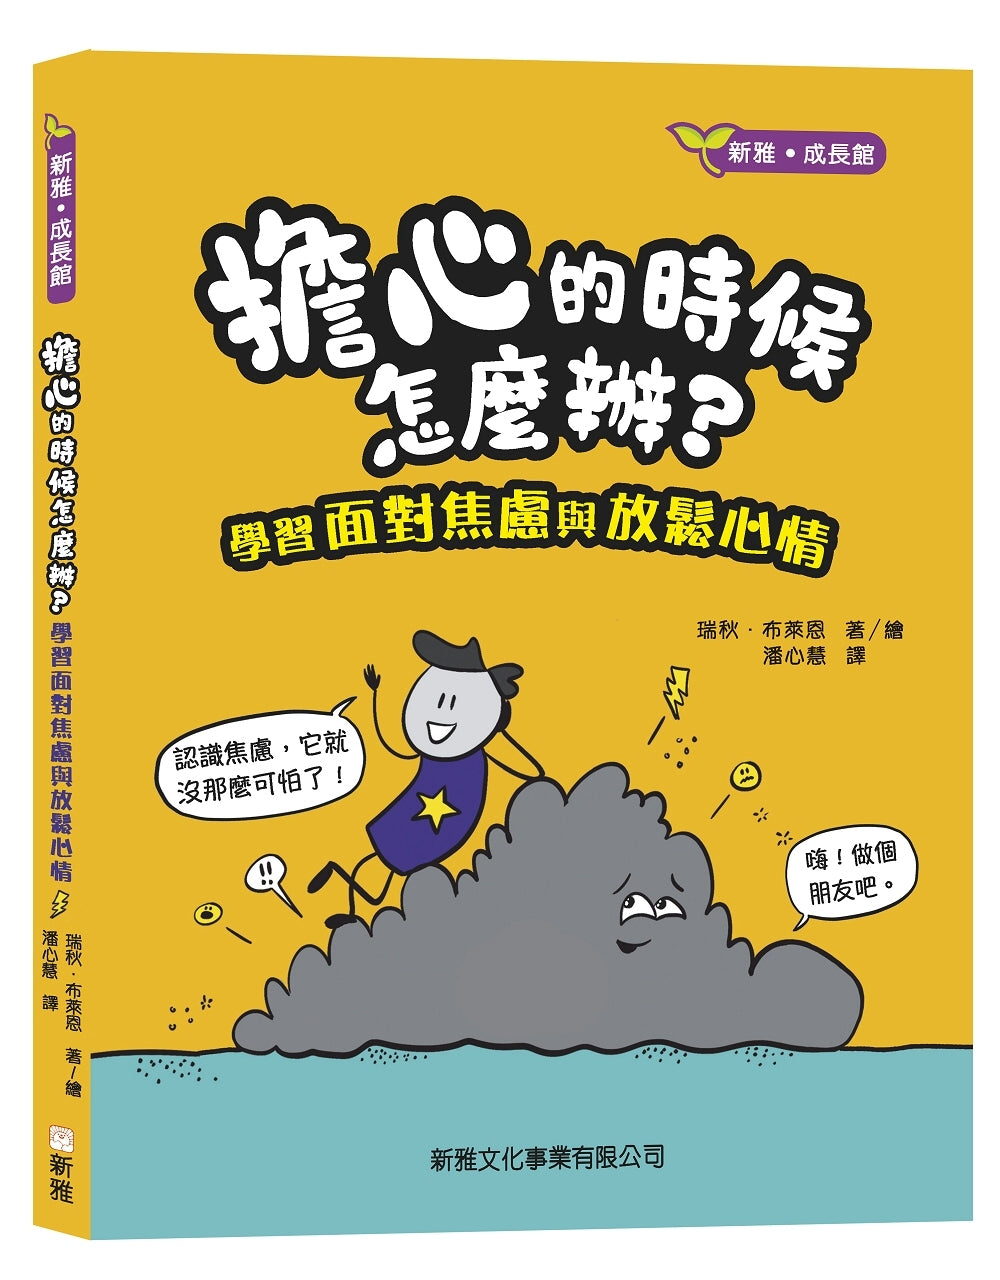 The Worry (Less) Book: Feel Strong, Find Calm, and Tame Your Anxiety! • 擔心的時候怎麼辦？學習面對焦慮與放鬆心情